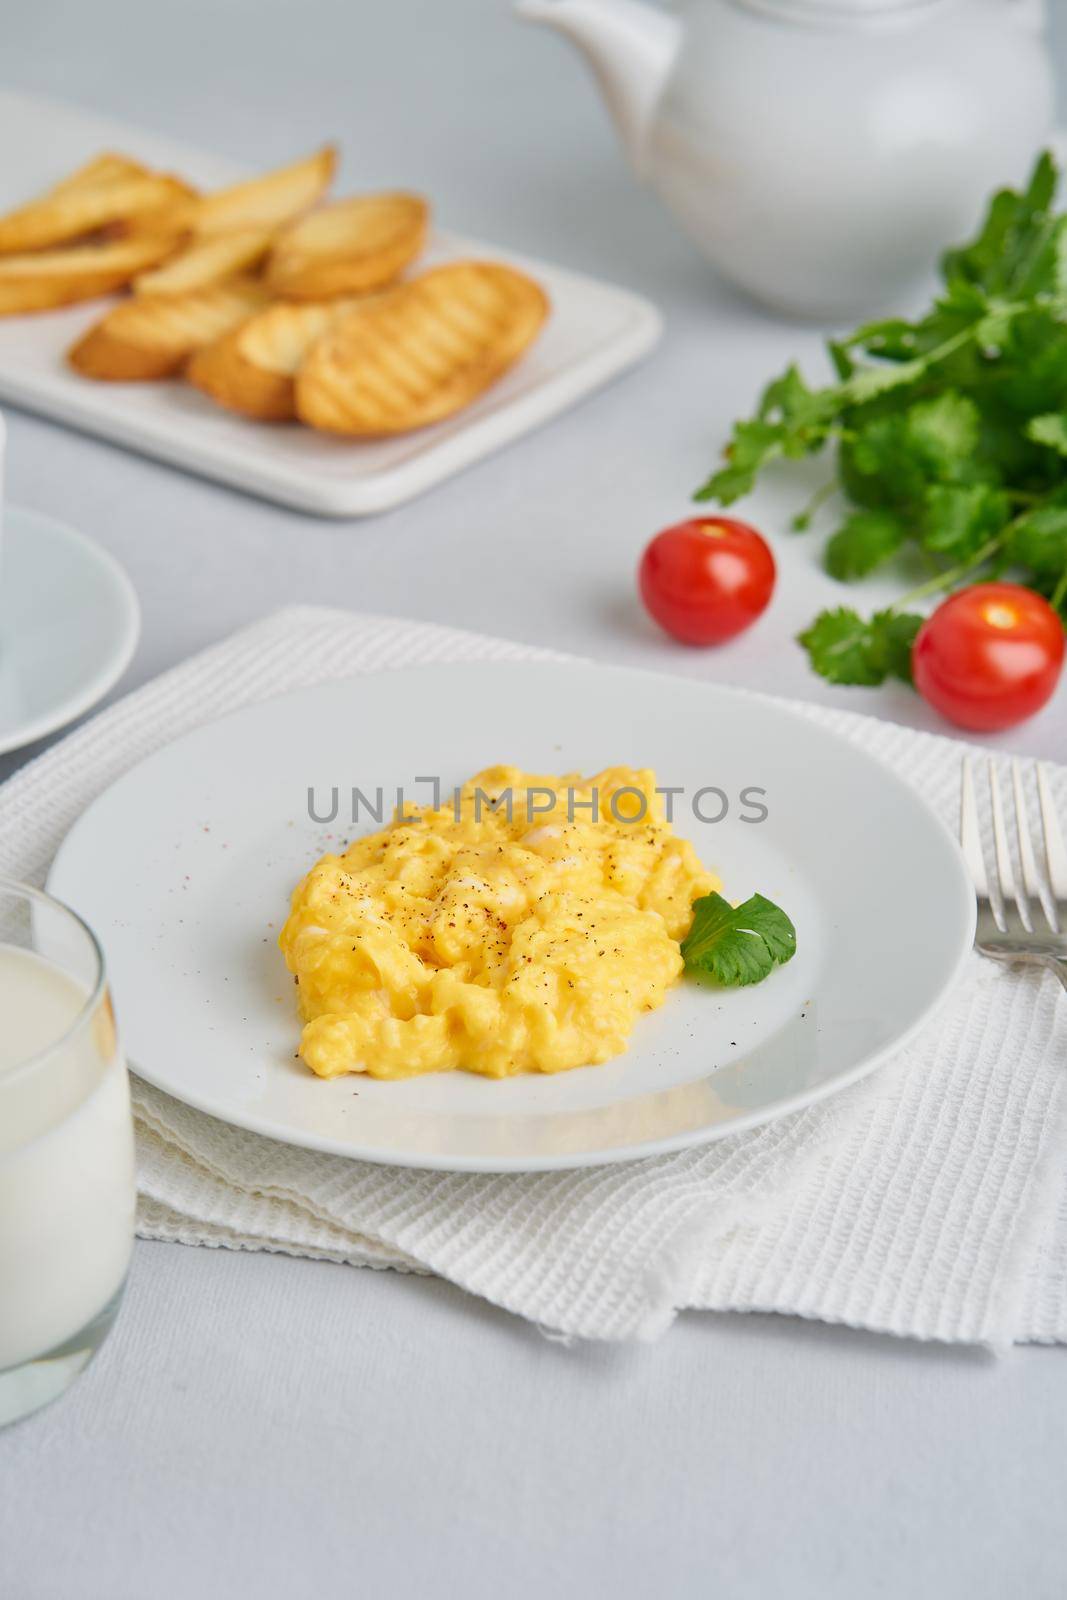 Scrambled eggs, Omelette. Breakfast with pan-fried eggs, glass of milk, tomatoes on white background. Vertical